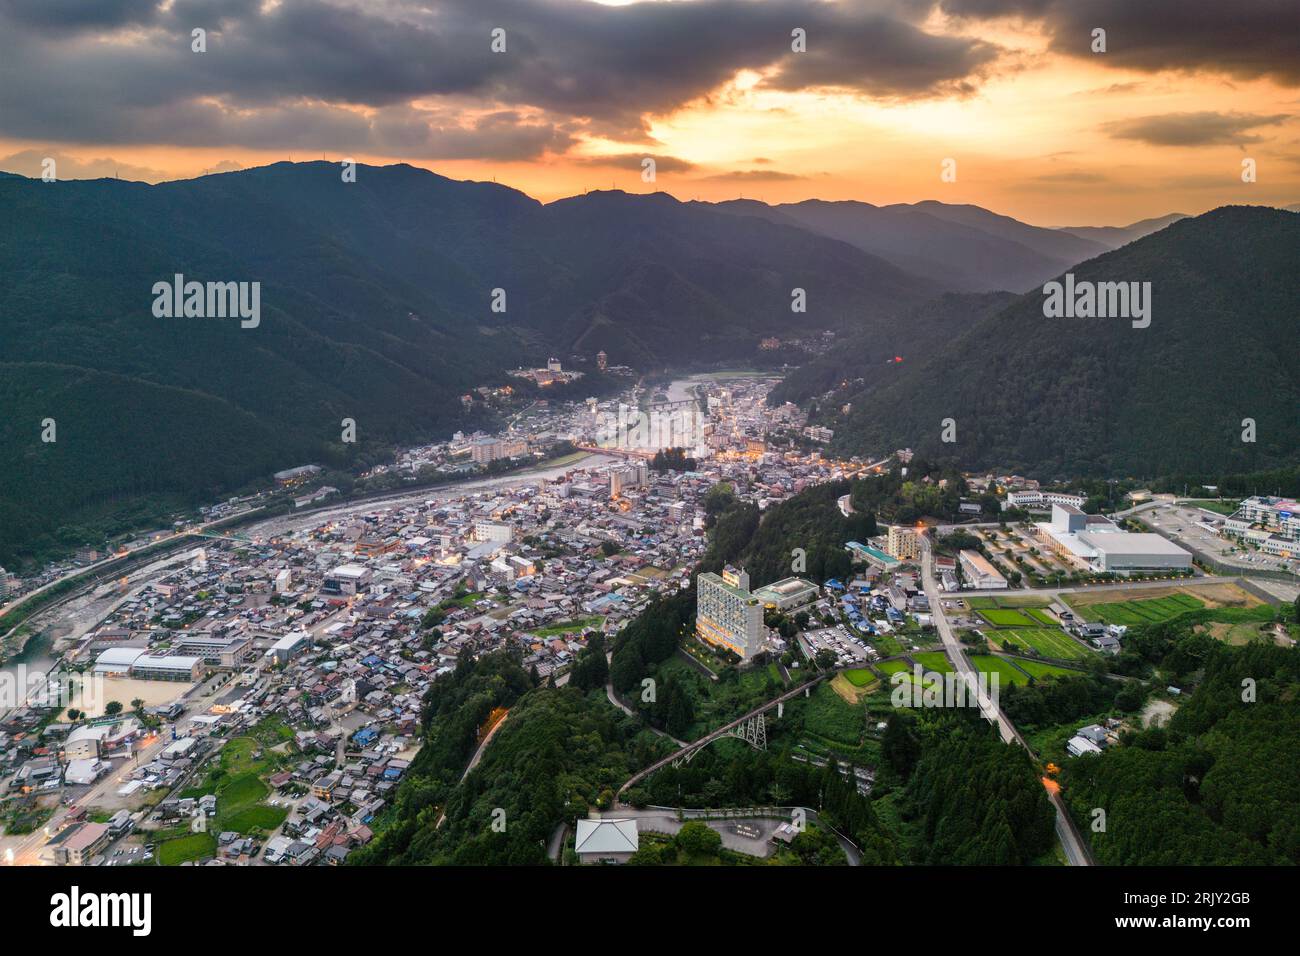 Gero, Gifu, Japan from the Mountains at Dusk. Stock Photo